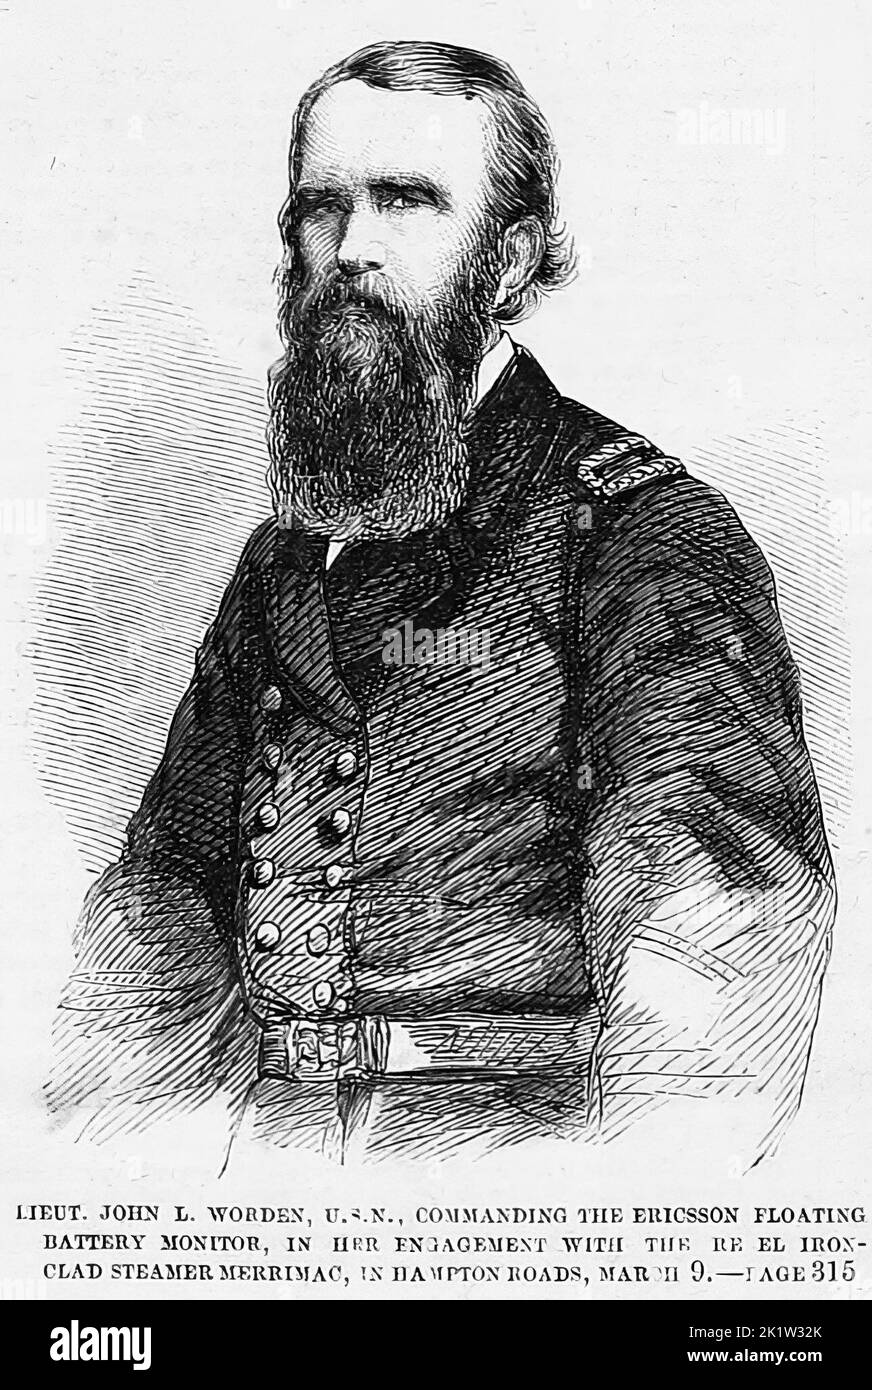 Portrait of Lieutenant John Lorimer Worden, United States Navy, commanding the Ericsson floating battery Monitor, in her engagement with the Rebel ironclad steamer Merrimack, in Hampton Roads, March 9th, 1862. 19th century American Civil War illustration from Frank Leslie's Illustrated Newspaper Stock Photo